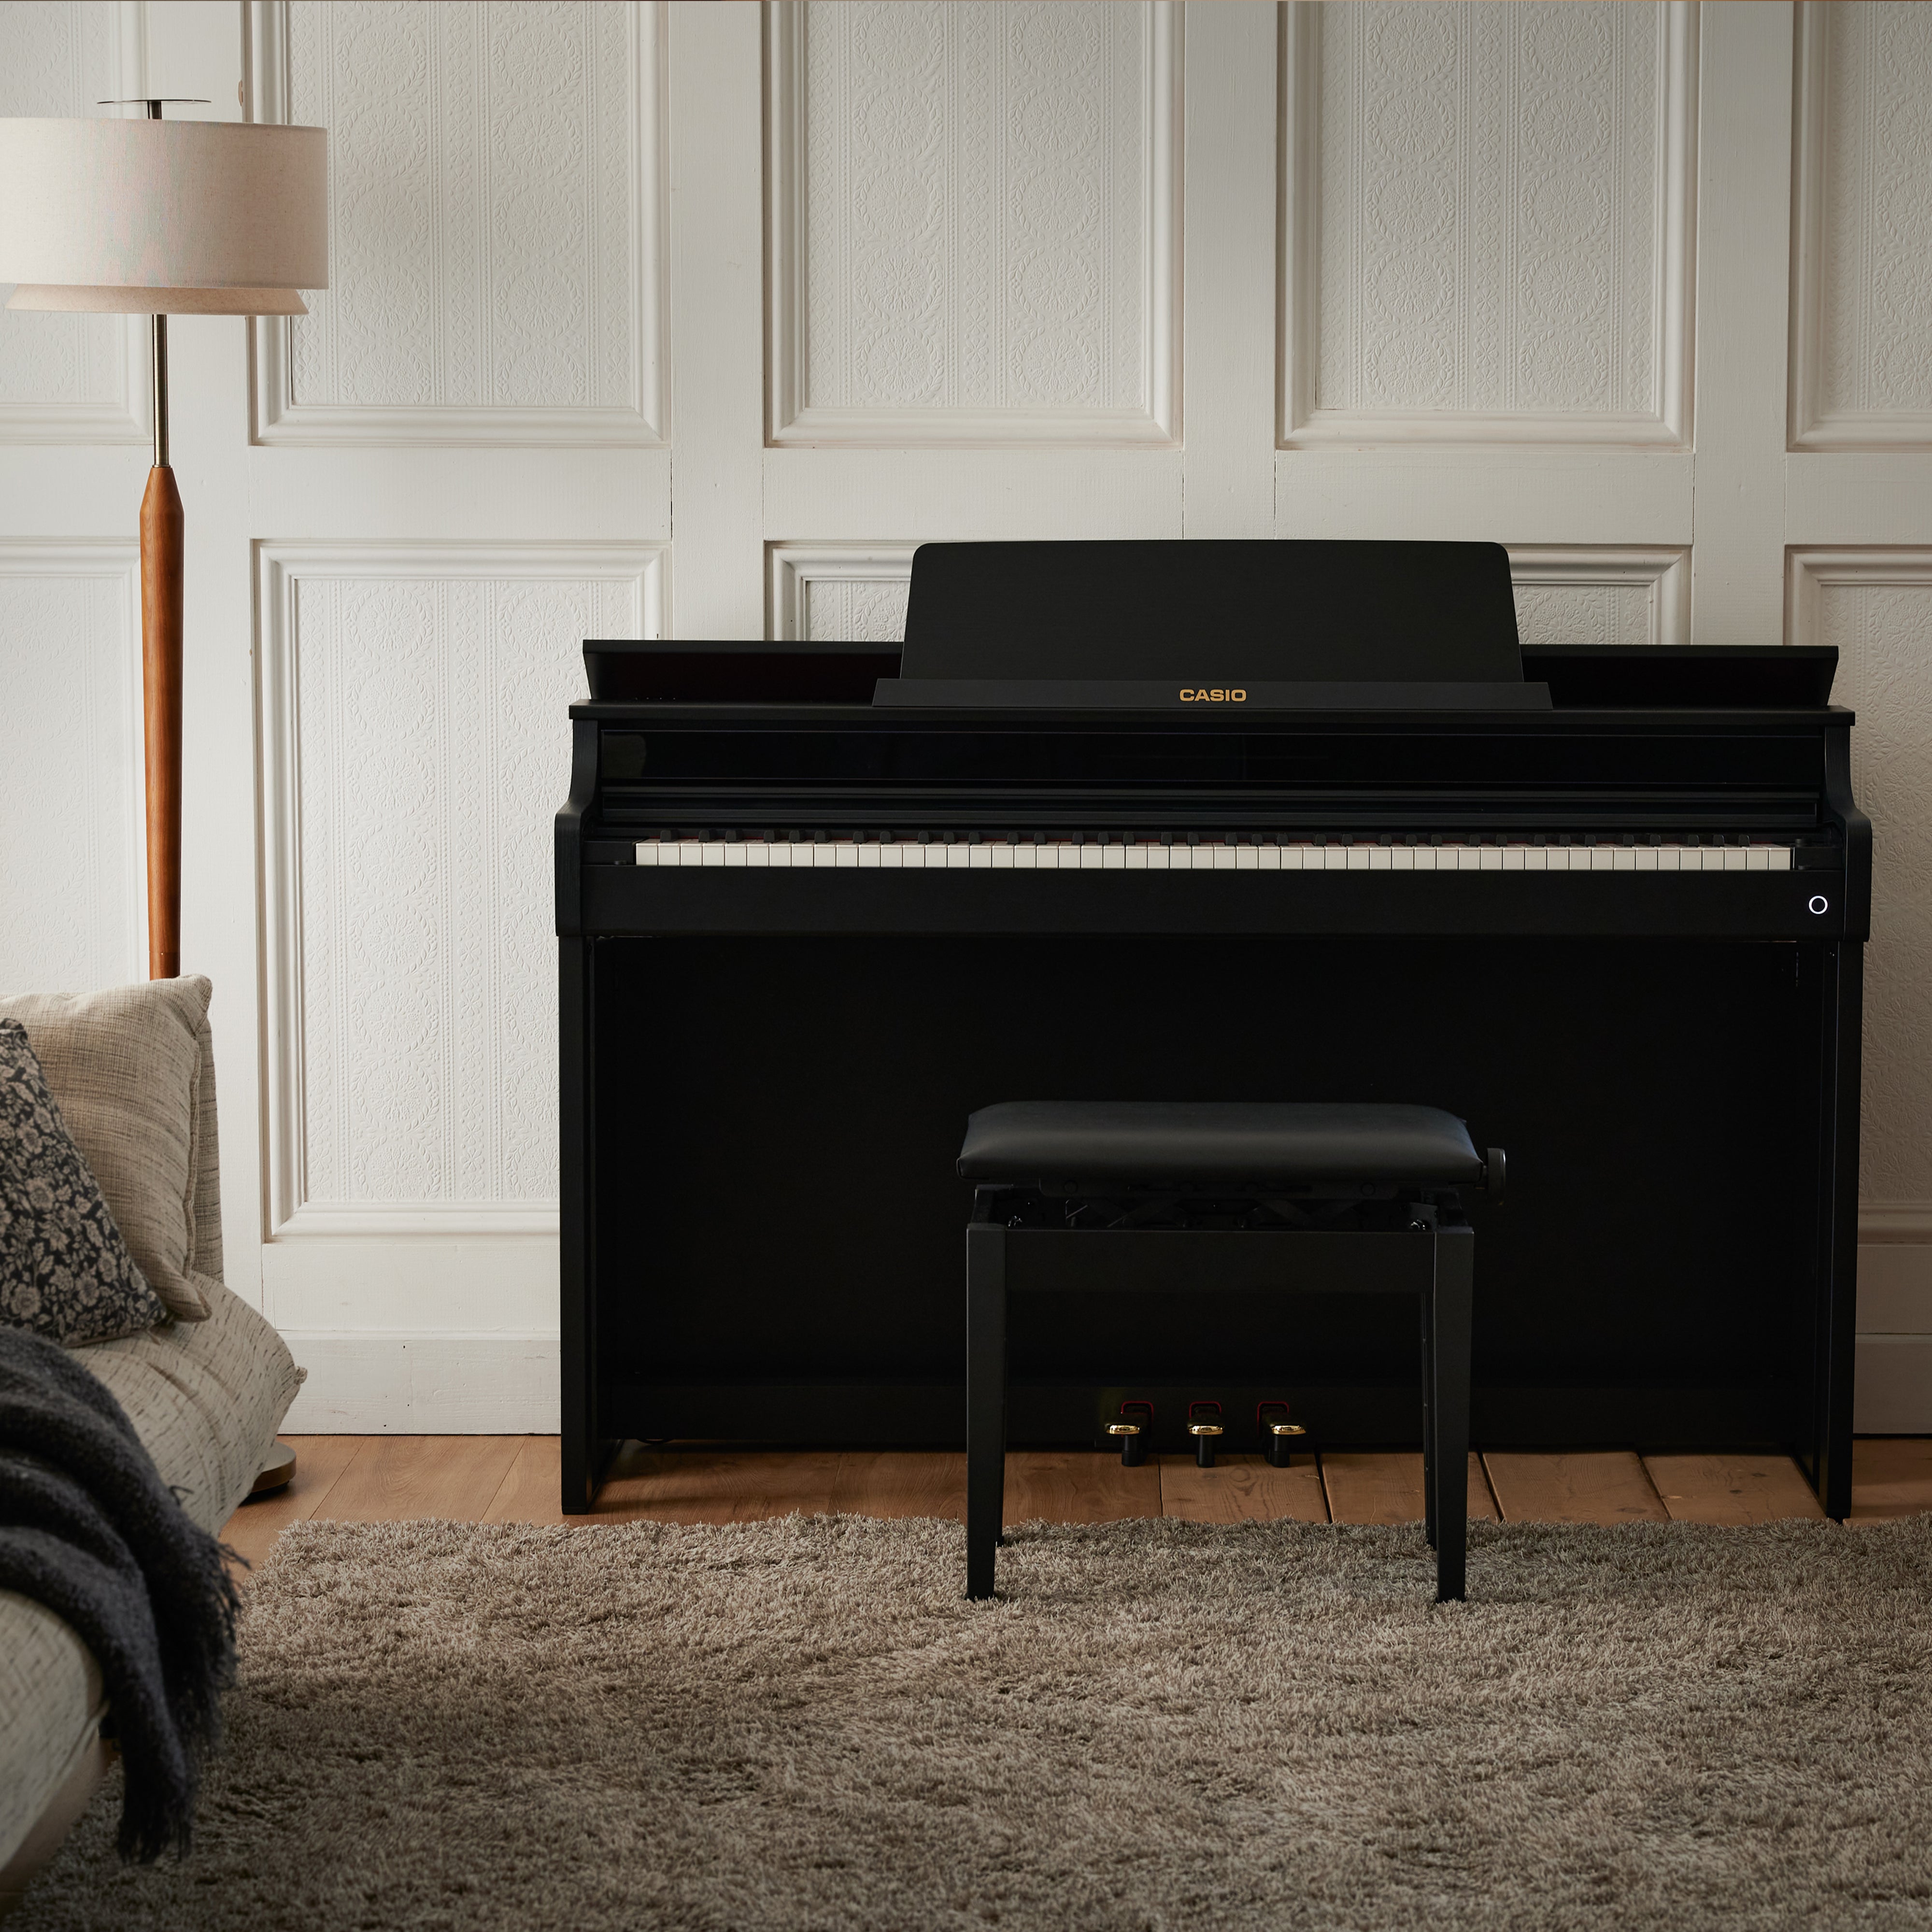 Casio Celviano AP-550 Digital Piano - Black - front view in a stylish living room